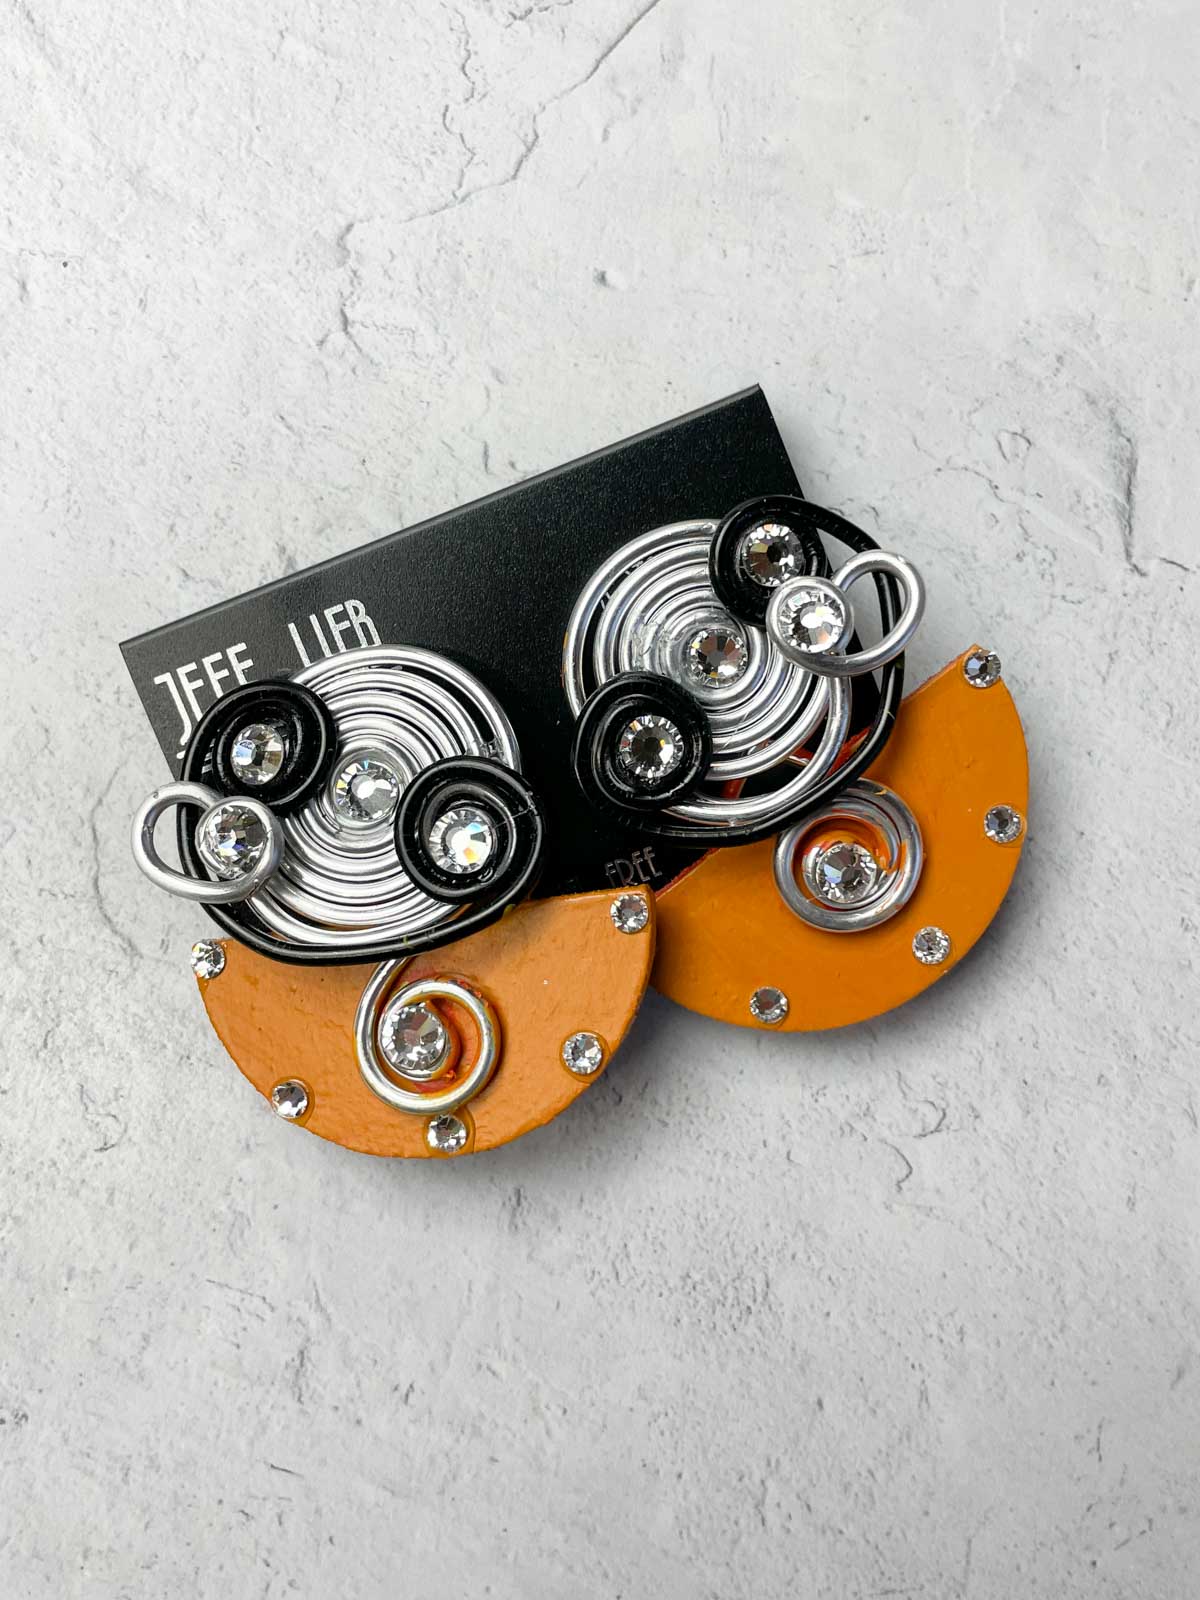 Jeff Lieb Total Design Jewelry Wire &amp; Wood Shapes Clip On Earrings, Orange/Silver/Black - Statement Boutique